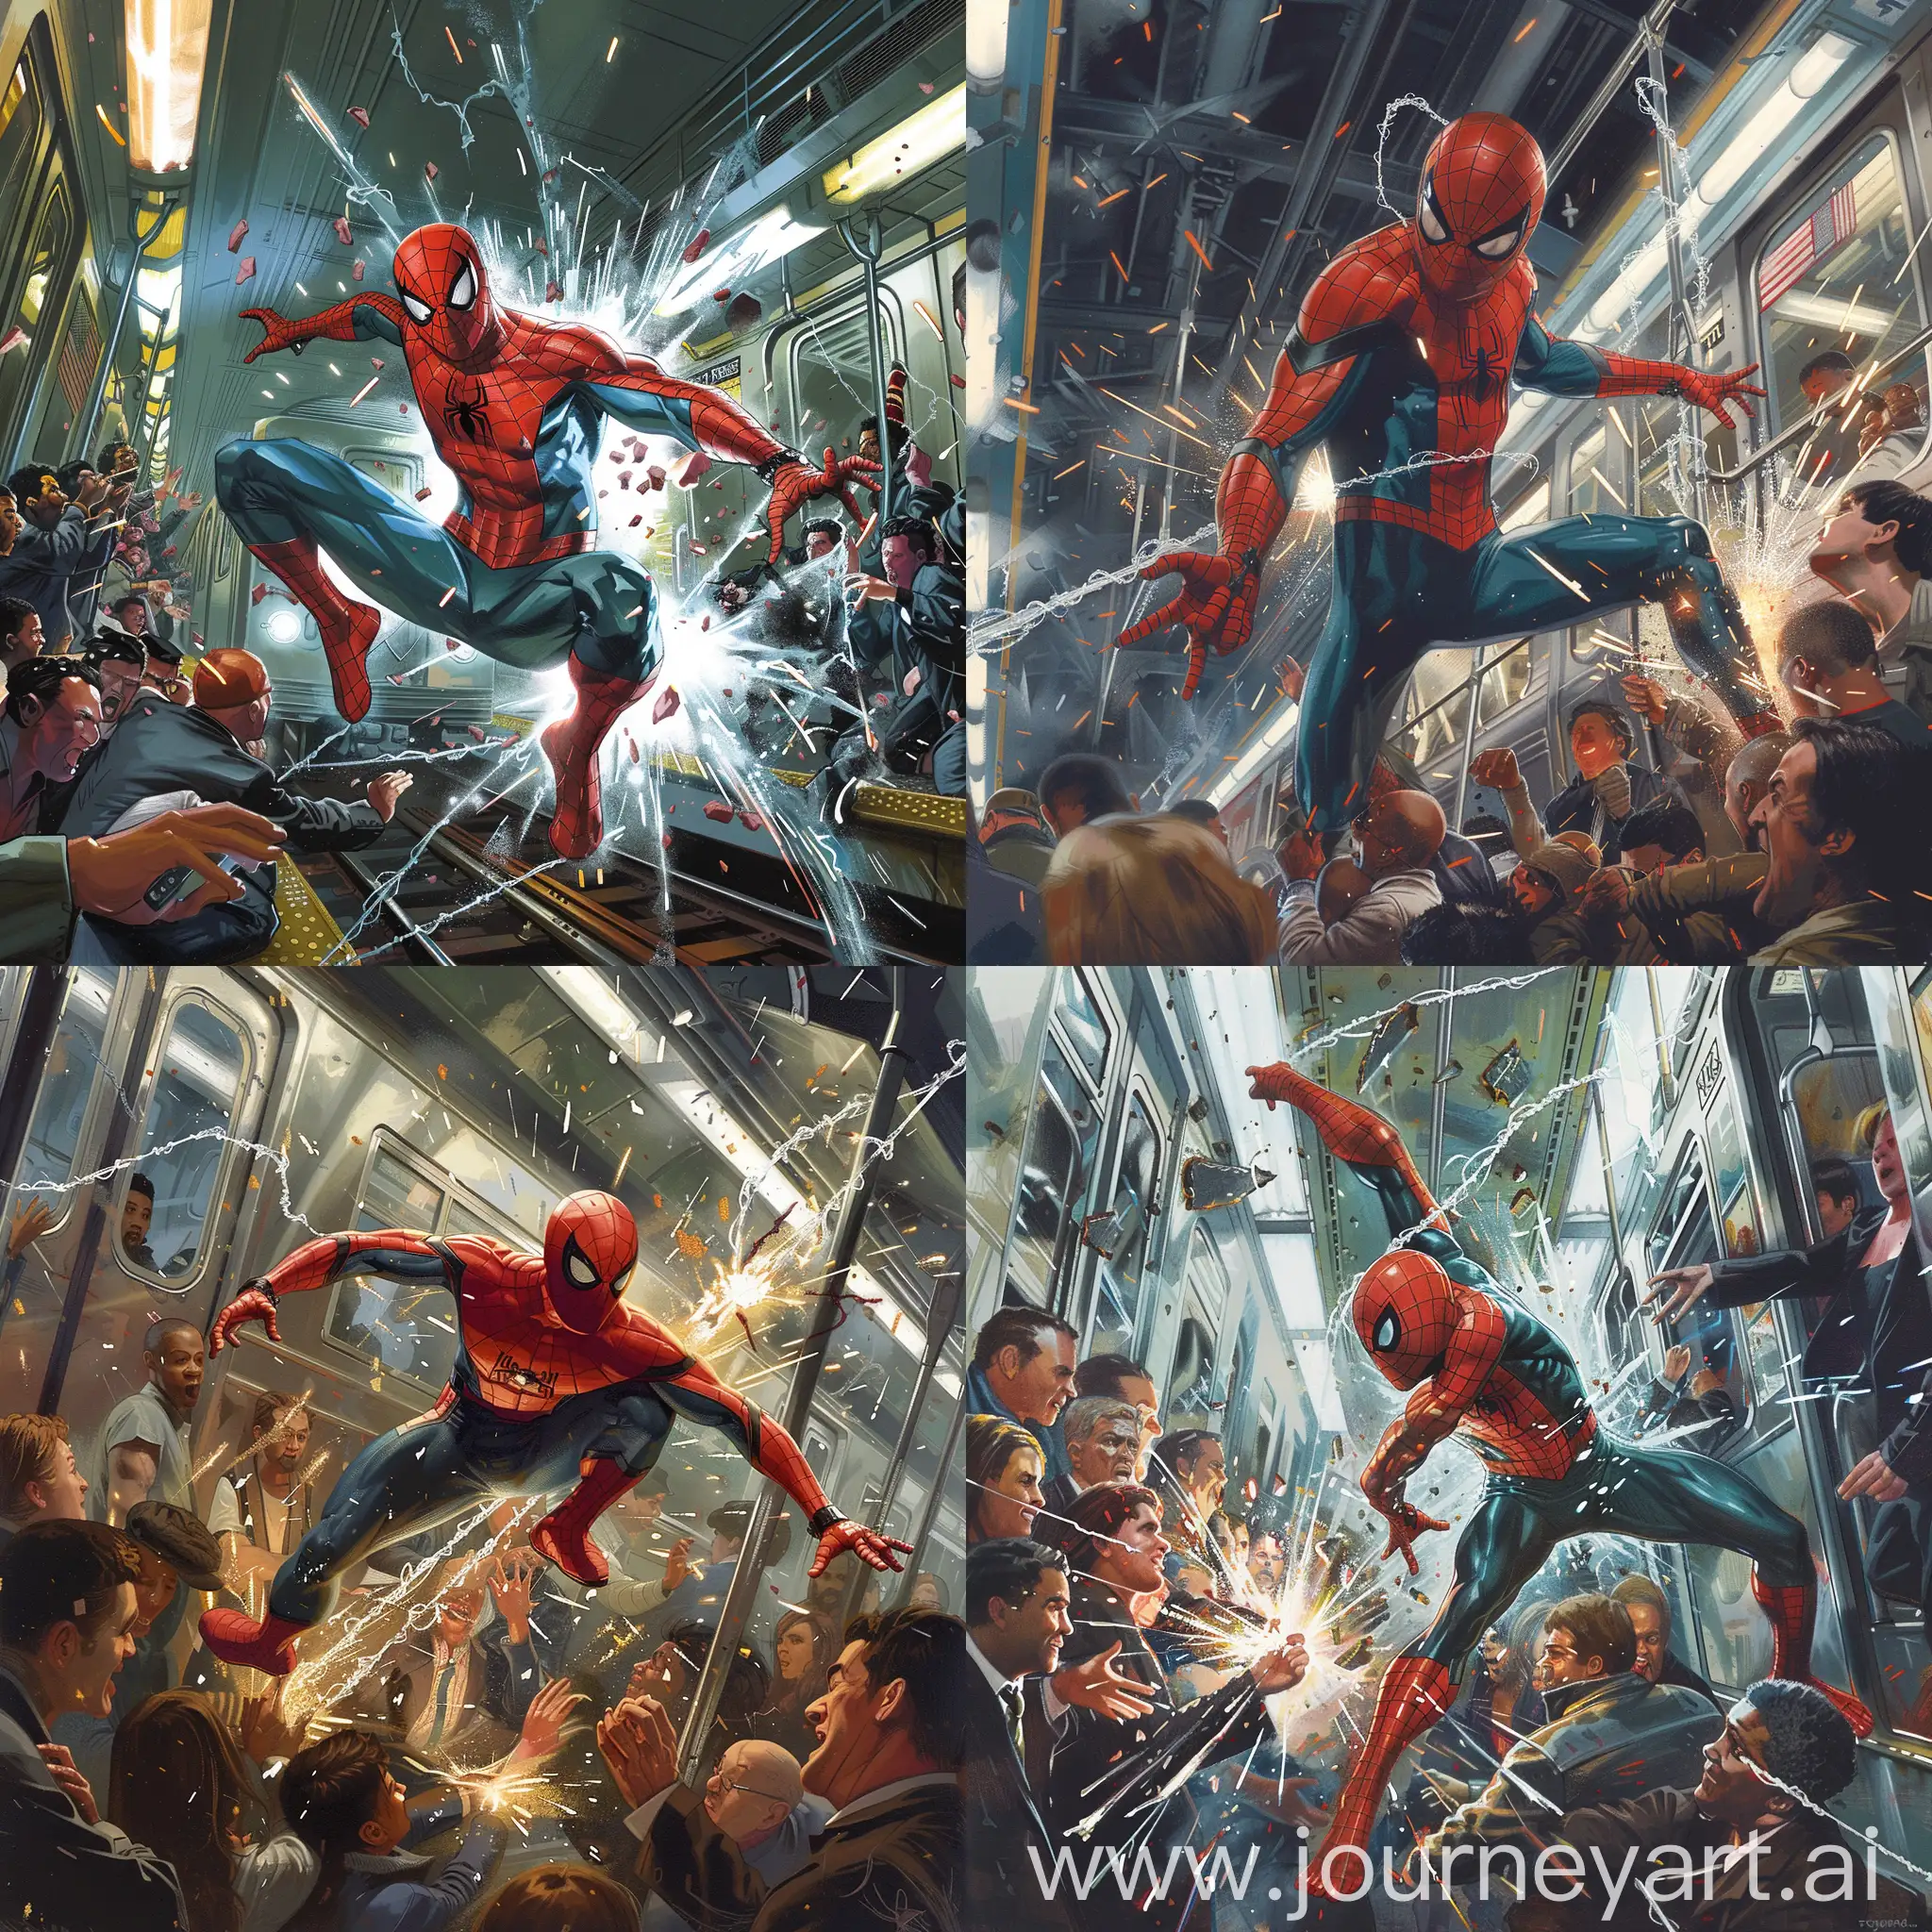 Illustrate a dynamic scene capturing the intense confrontation between Spider-Man and Electro in the depths of a bustling subway station. As sparks fly and glass shatters, depict the pivotal moment where Electro hurls Spider-Man into an oncoming subway train packed with startled passengers. The focus should be on Spider-Man's agile form as he's flung through the air, surrounded by the chaos of the electrifying battle and the panic of the commuters. Emphasize the kinetic energy and the sense of danger as the two adversaries clash in this adrenaline-fueled showdown.